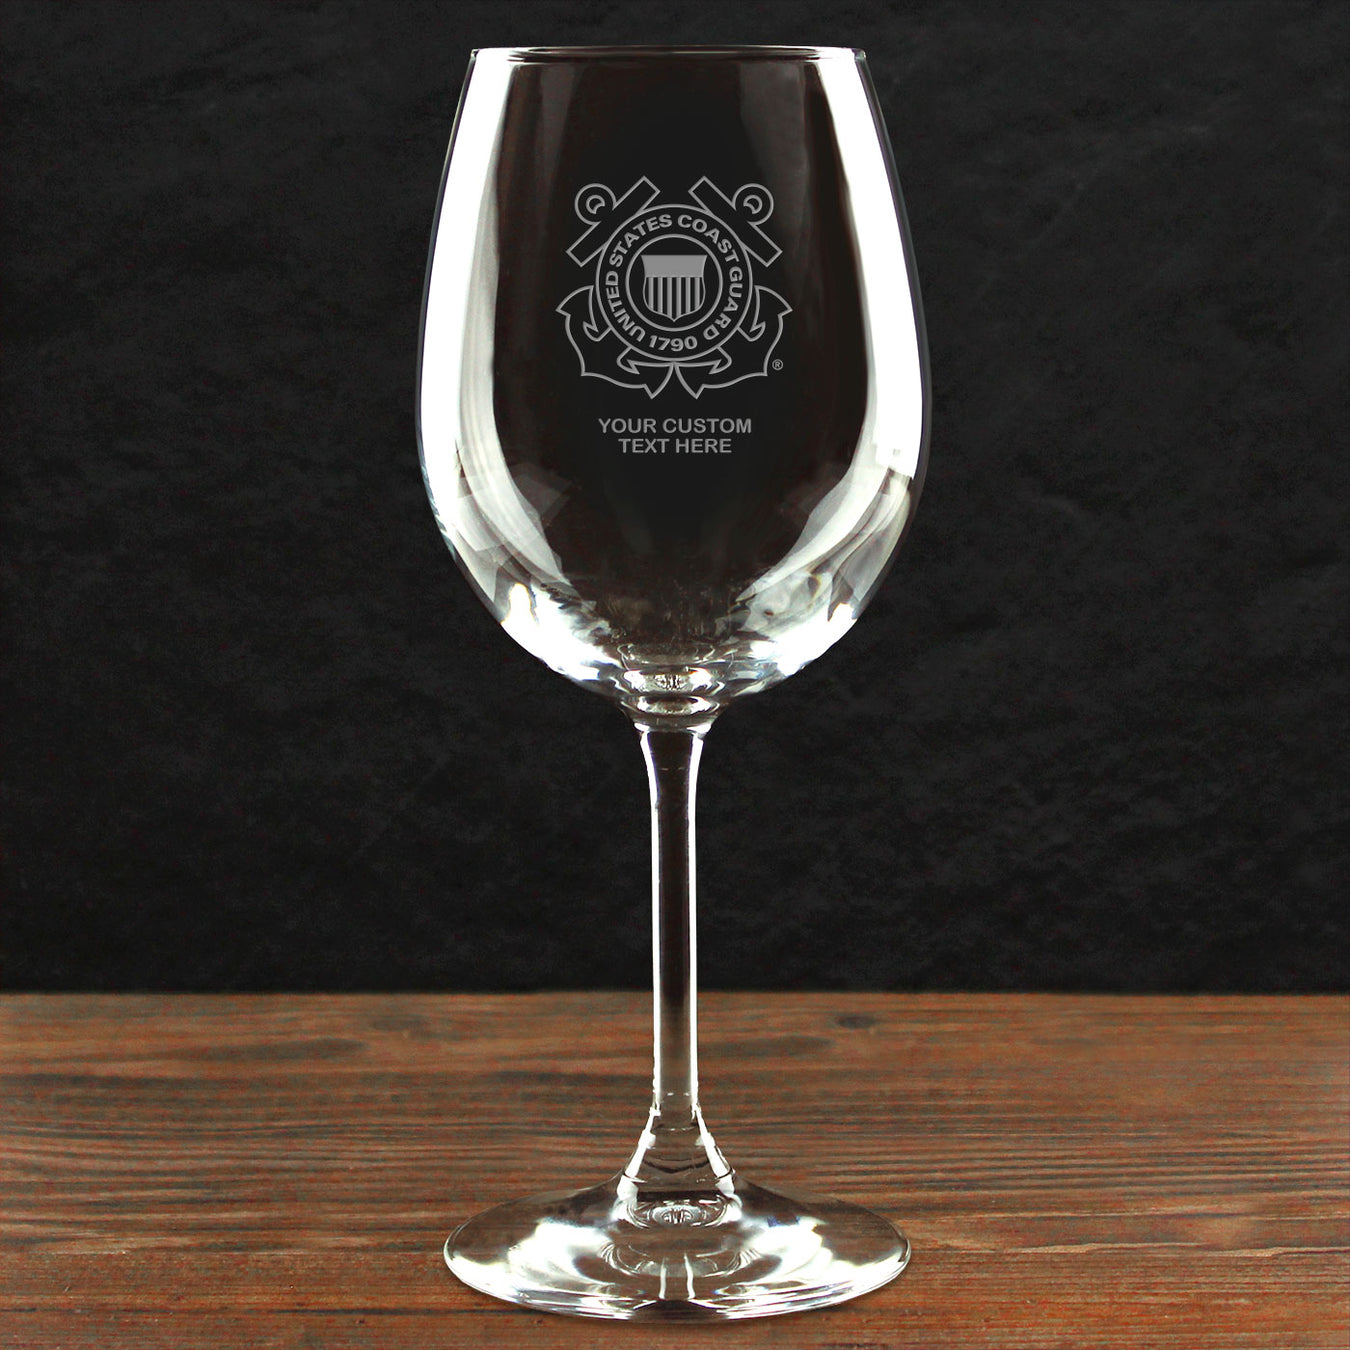 US Coast Guard Personalized Etched Glassware